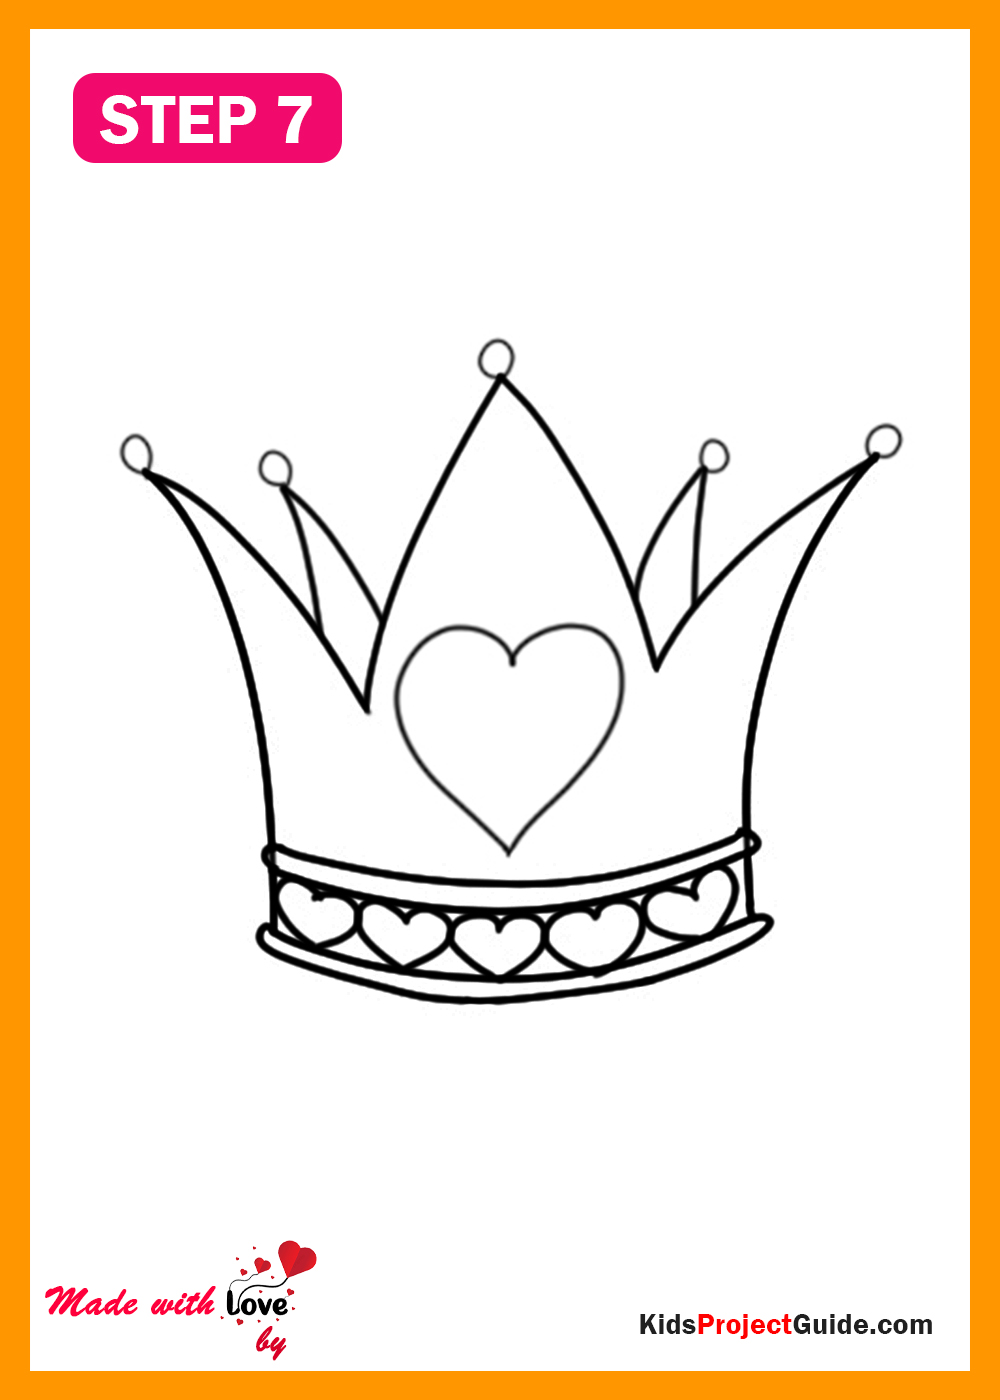 How To Draw A Princess Crown | Easy Step By Step Guide